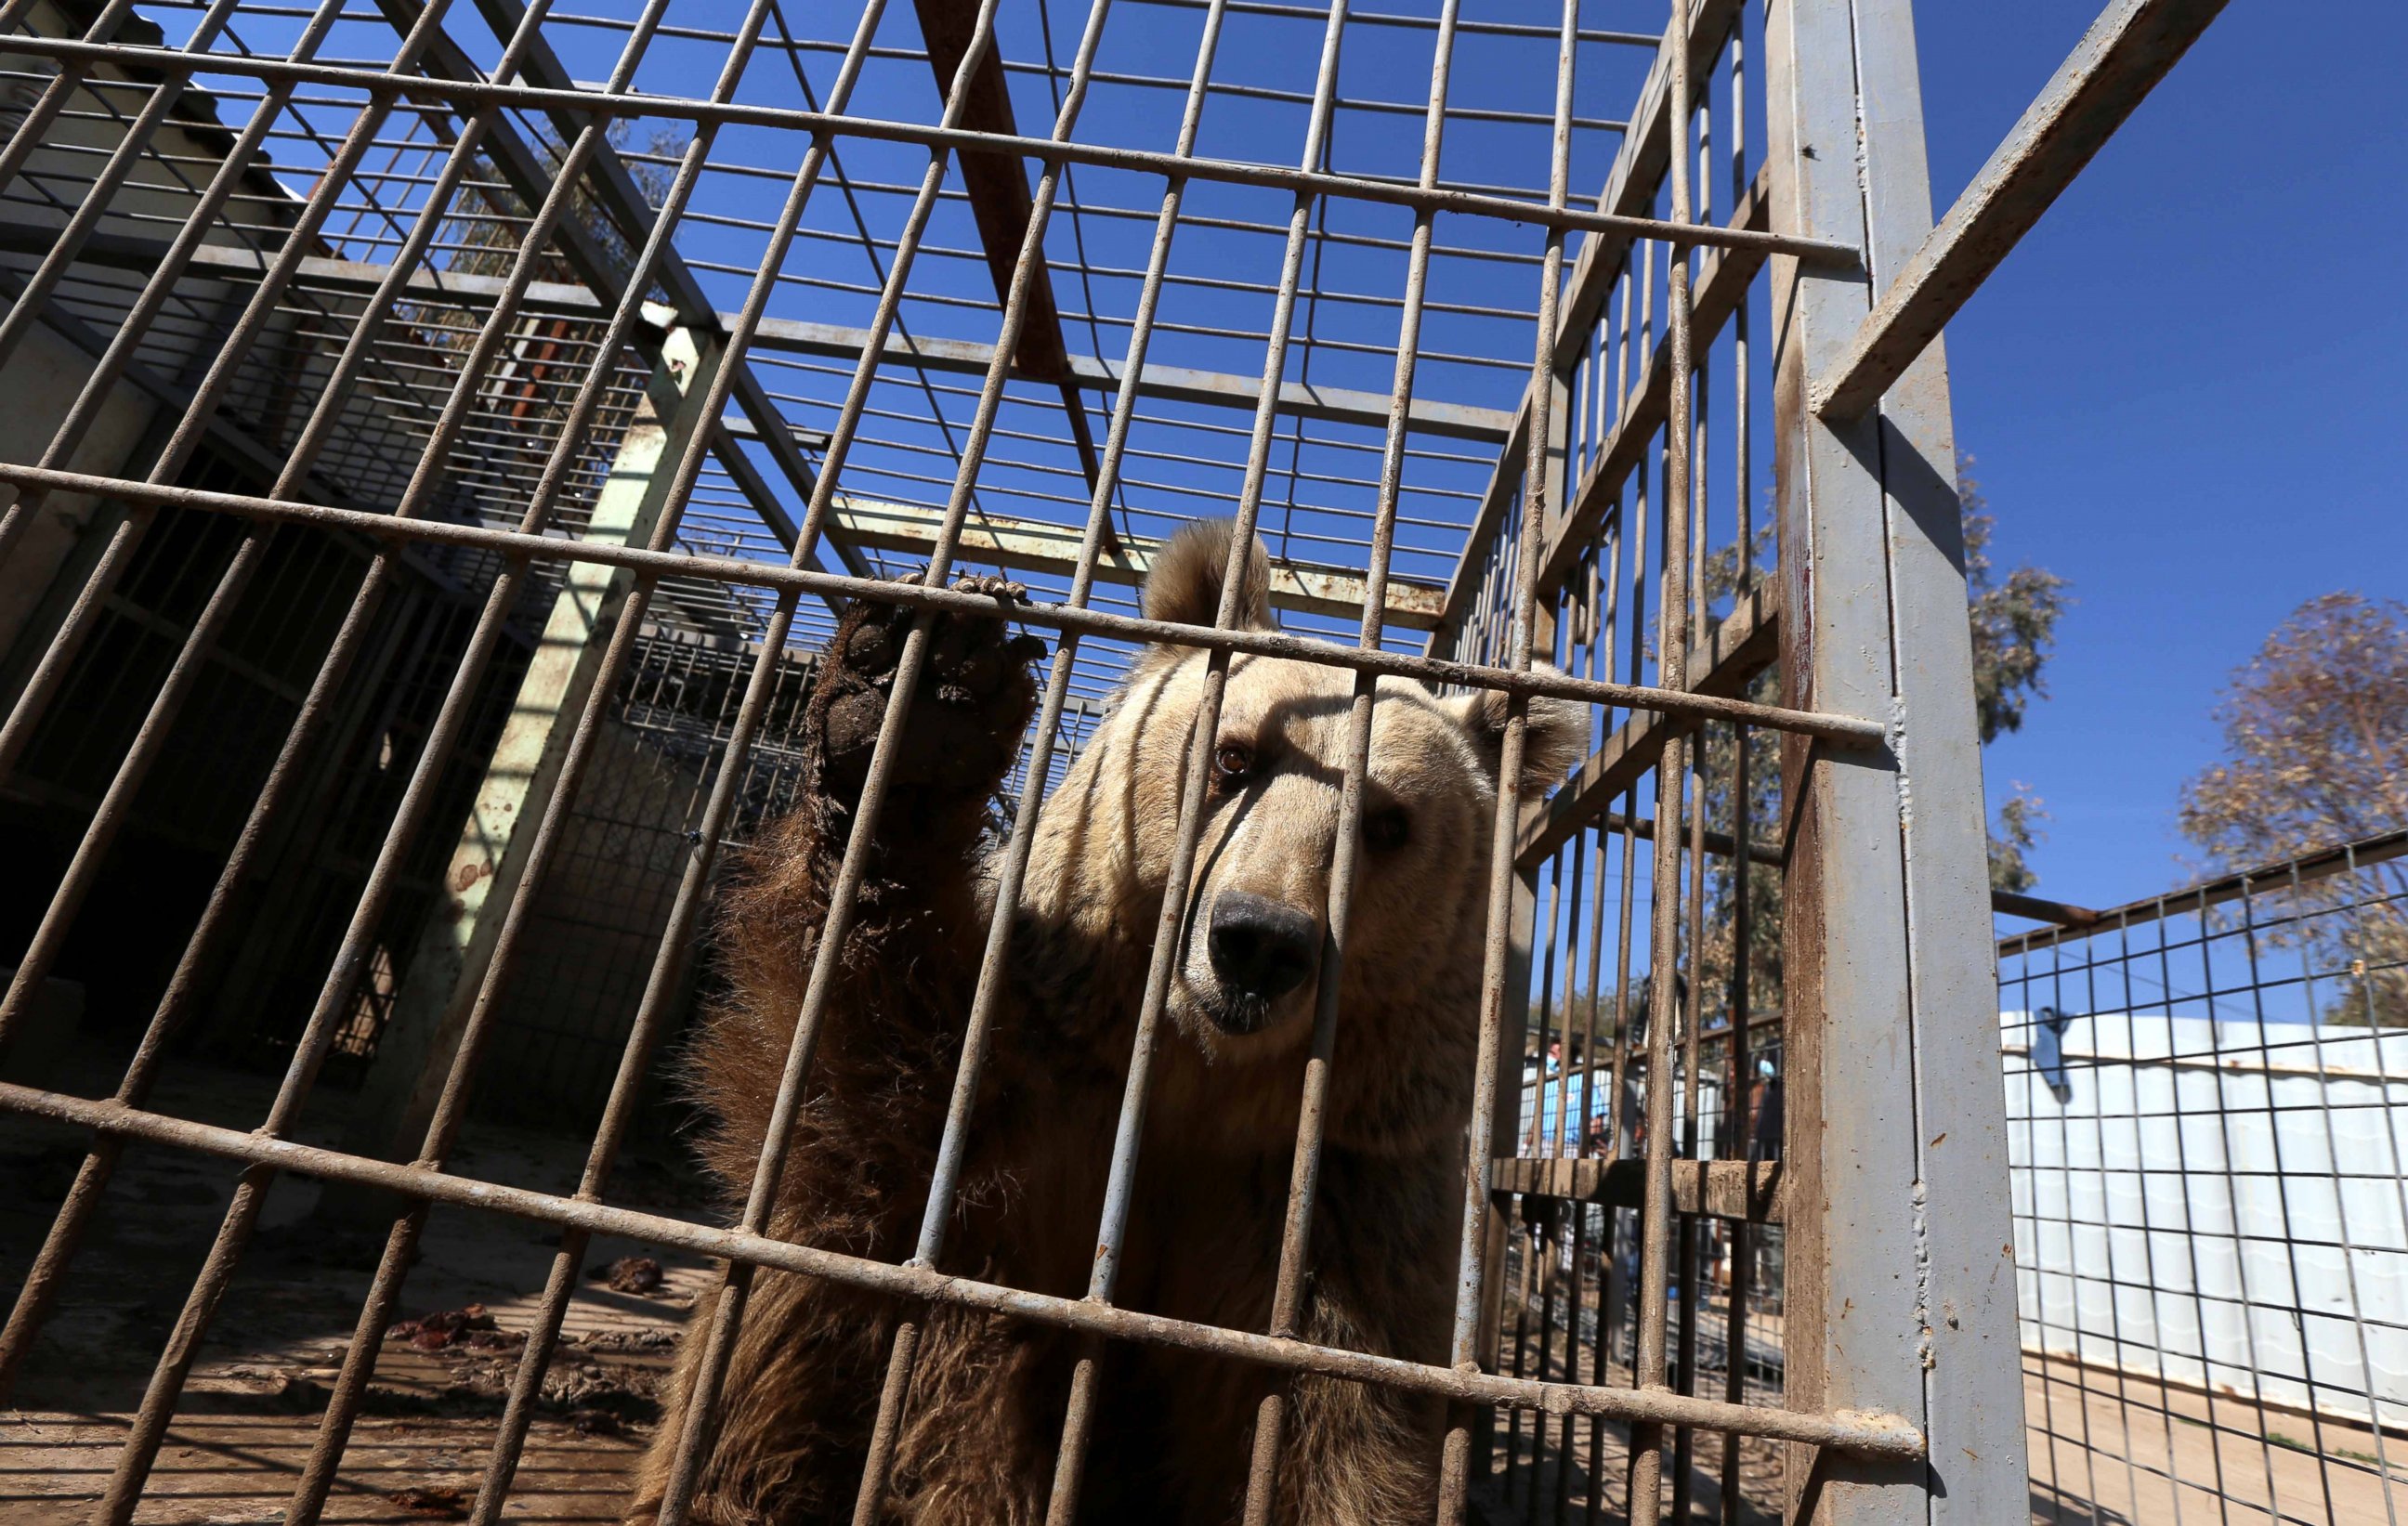 PHOTO: An abandoned bear stands in its cage before receiving treatment from members of the international animal welfare charity "Four Paws" at the Montazah al-Morour Zoo in eastern Mosul on Feb. 21, 2017.